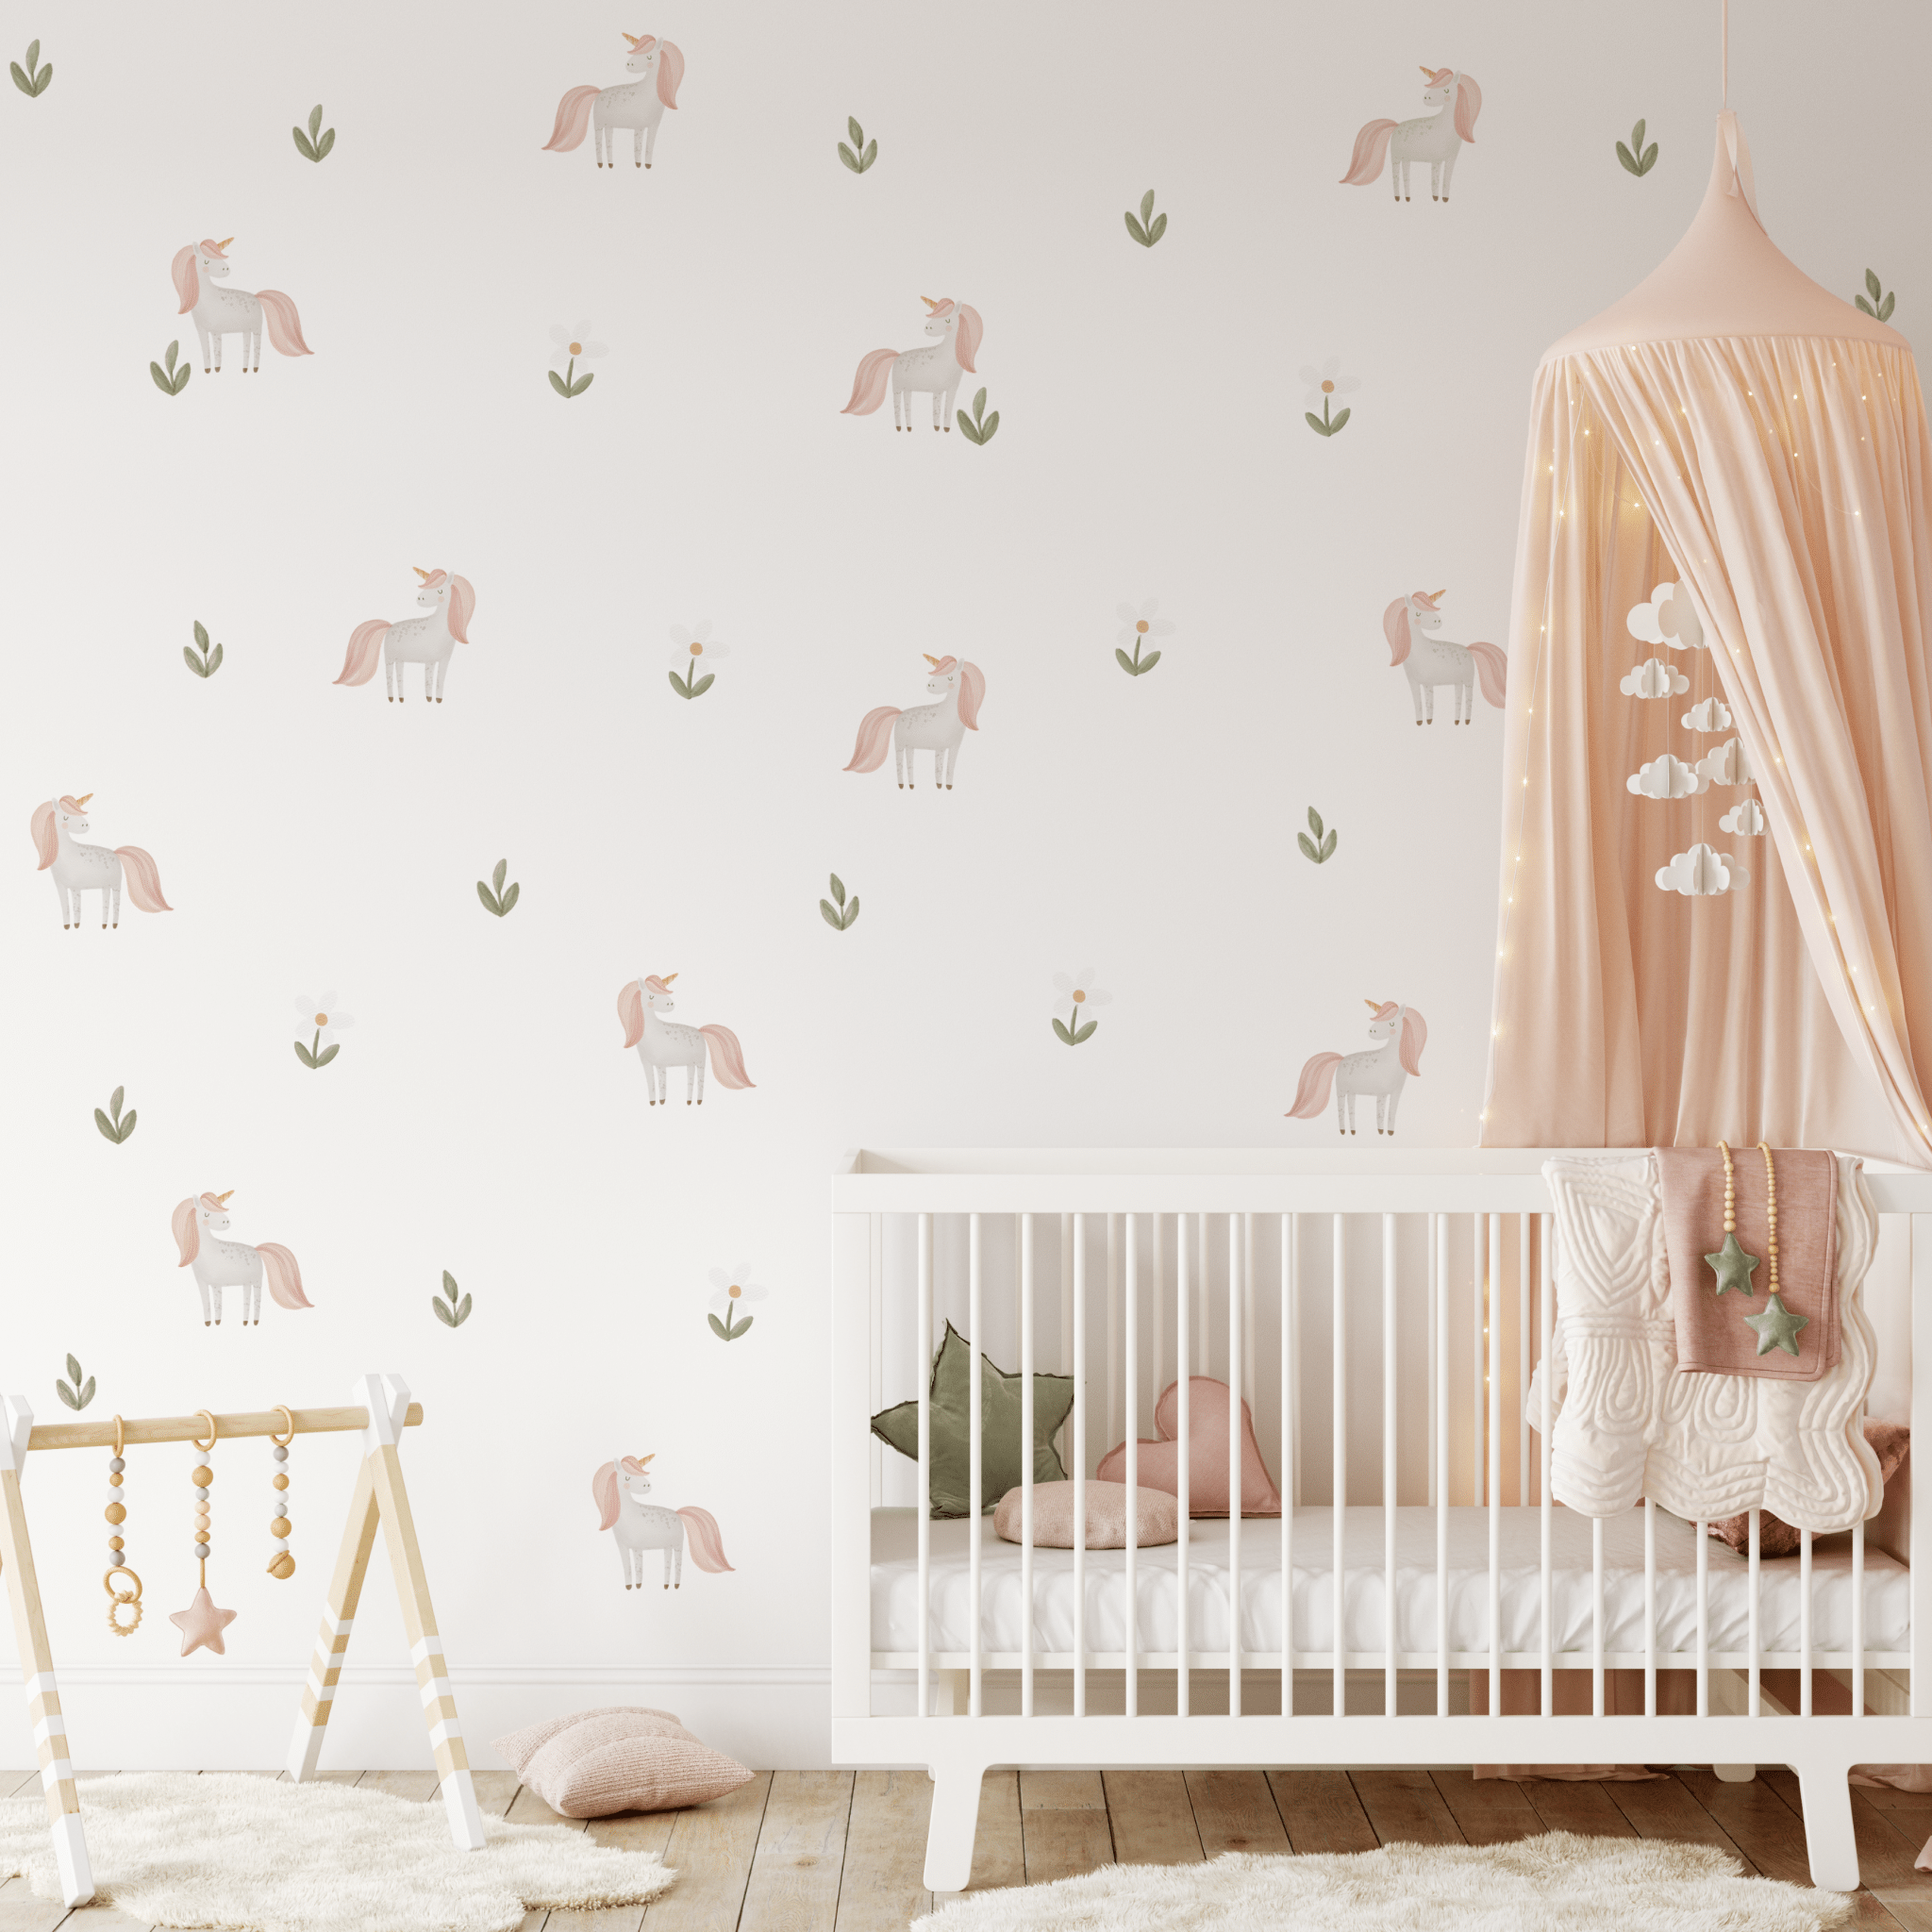 Watercolor unicorn wall stickers for baby girl nursery